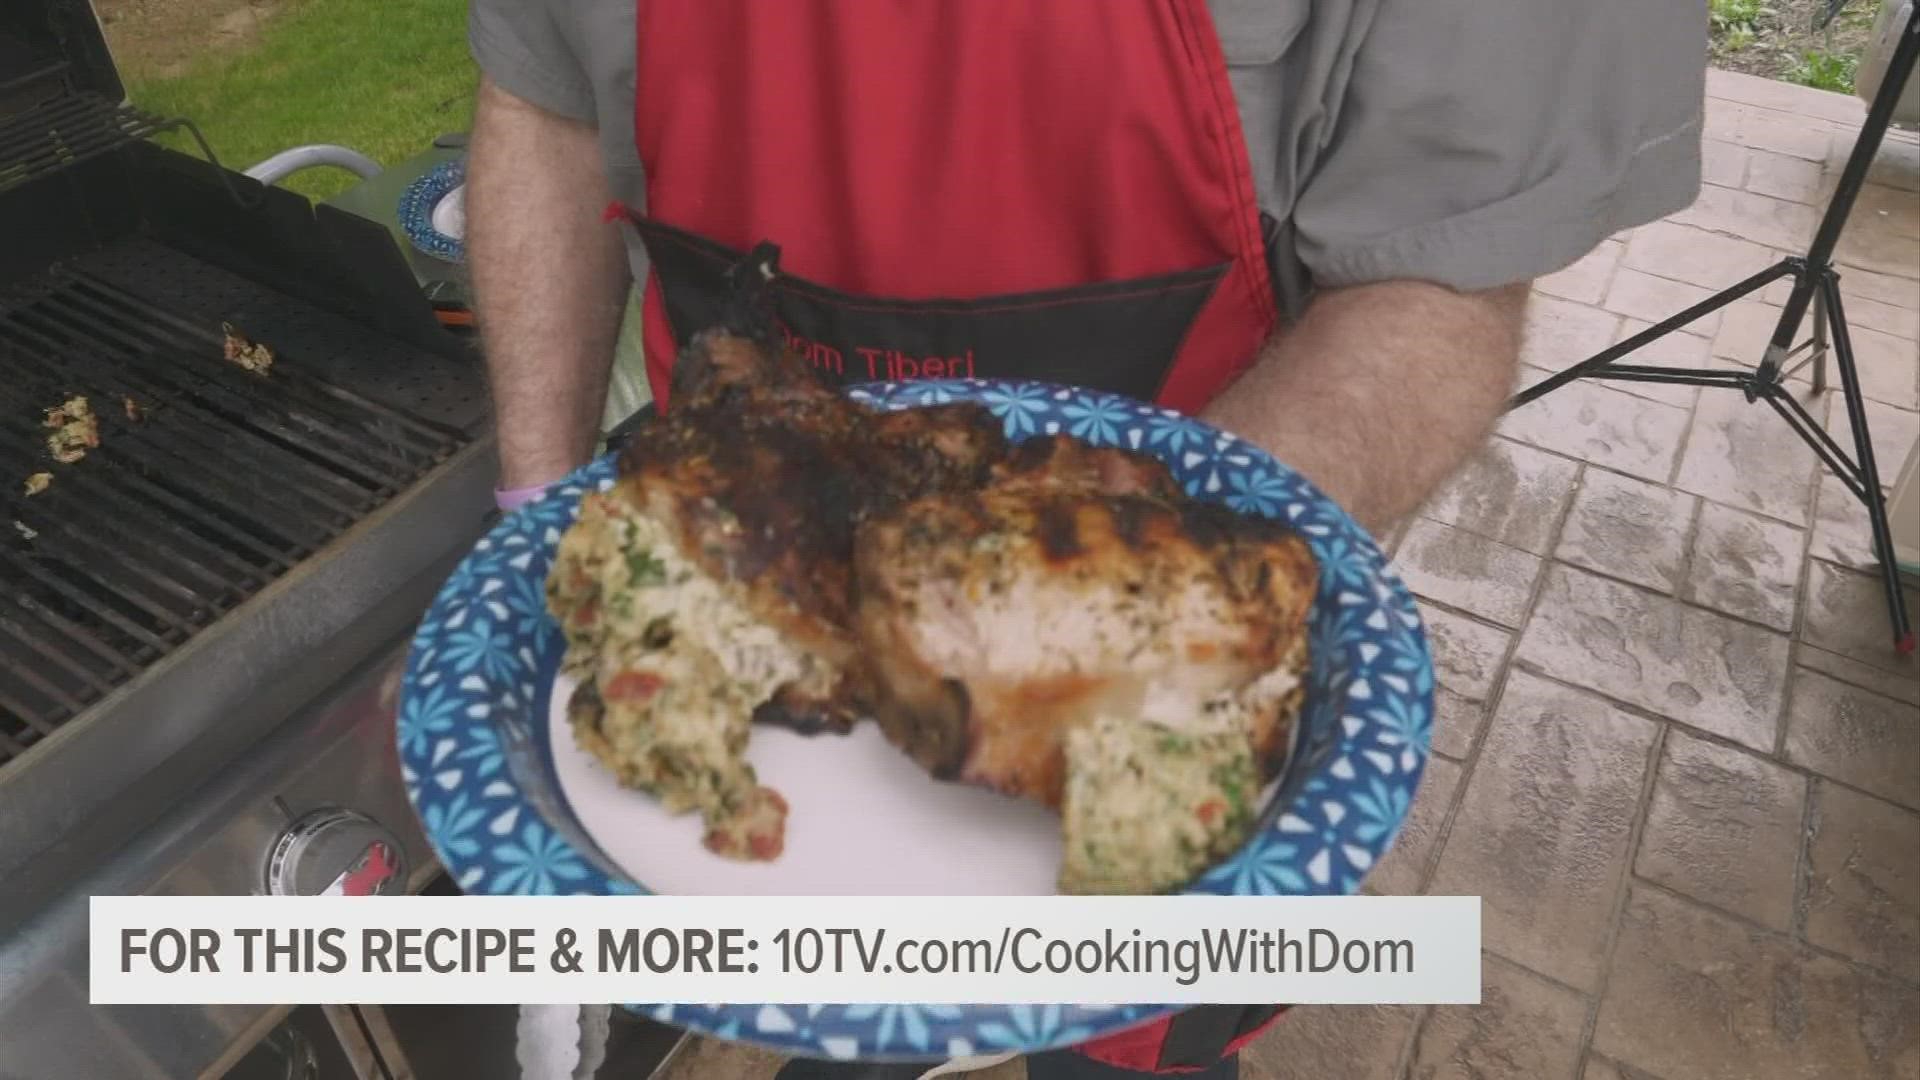 Watch as Dom works his magic at the grill with these delicious stuffed pork chops.